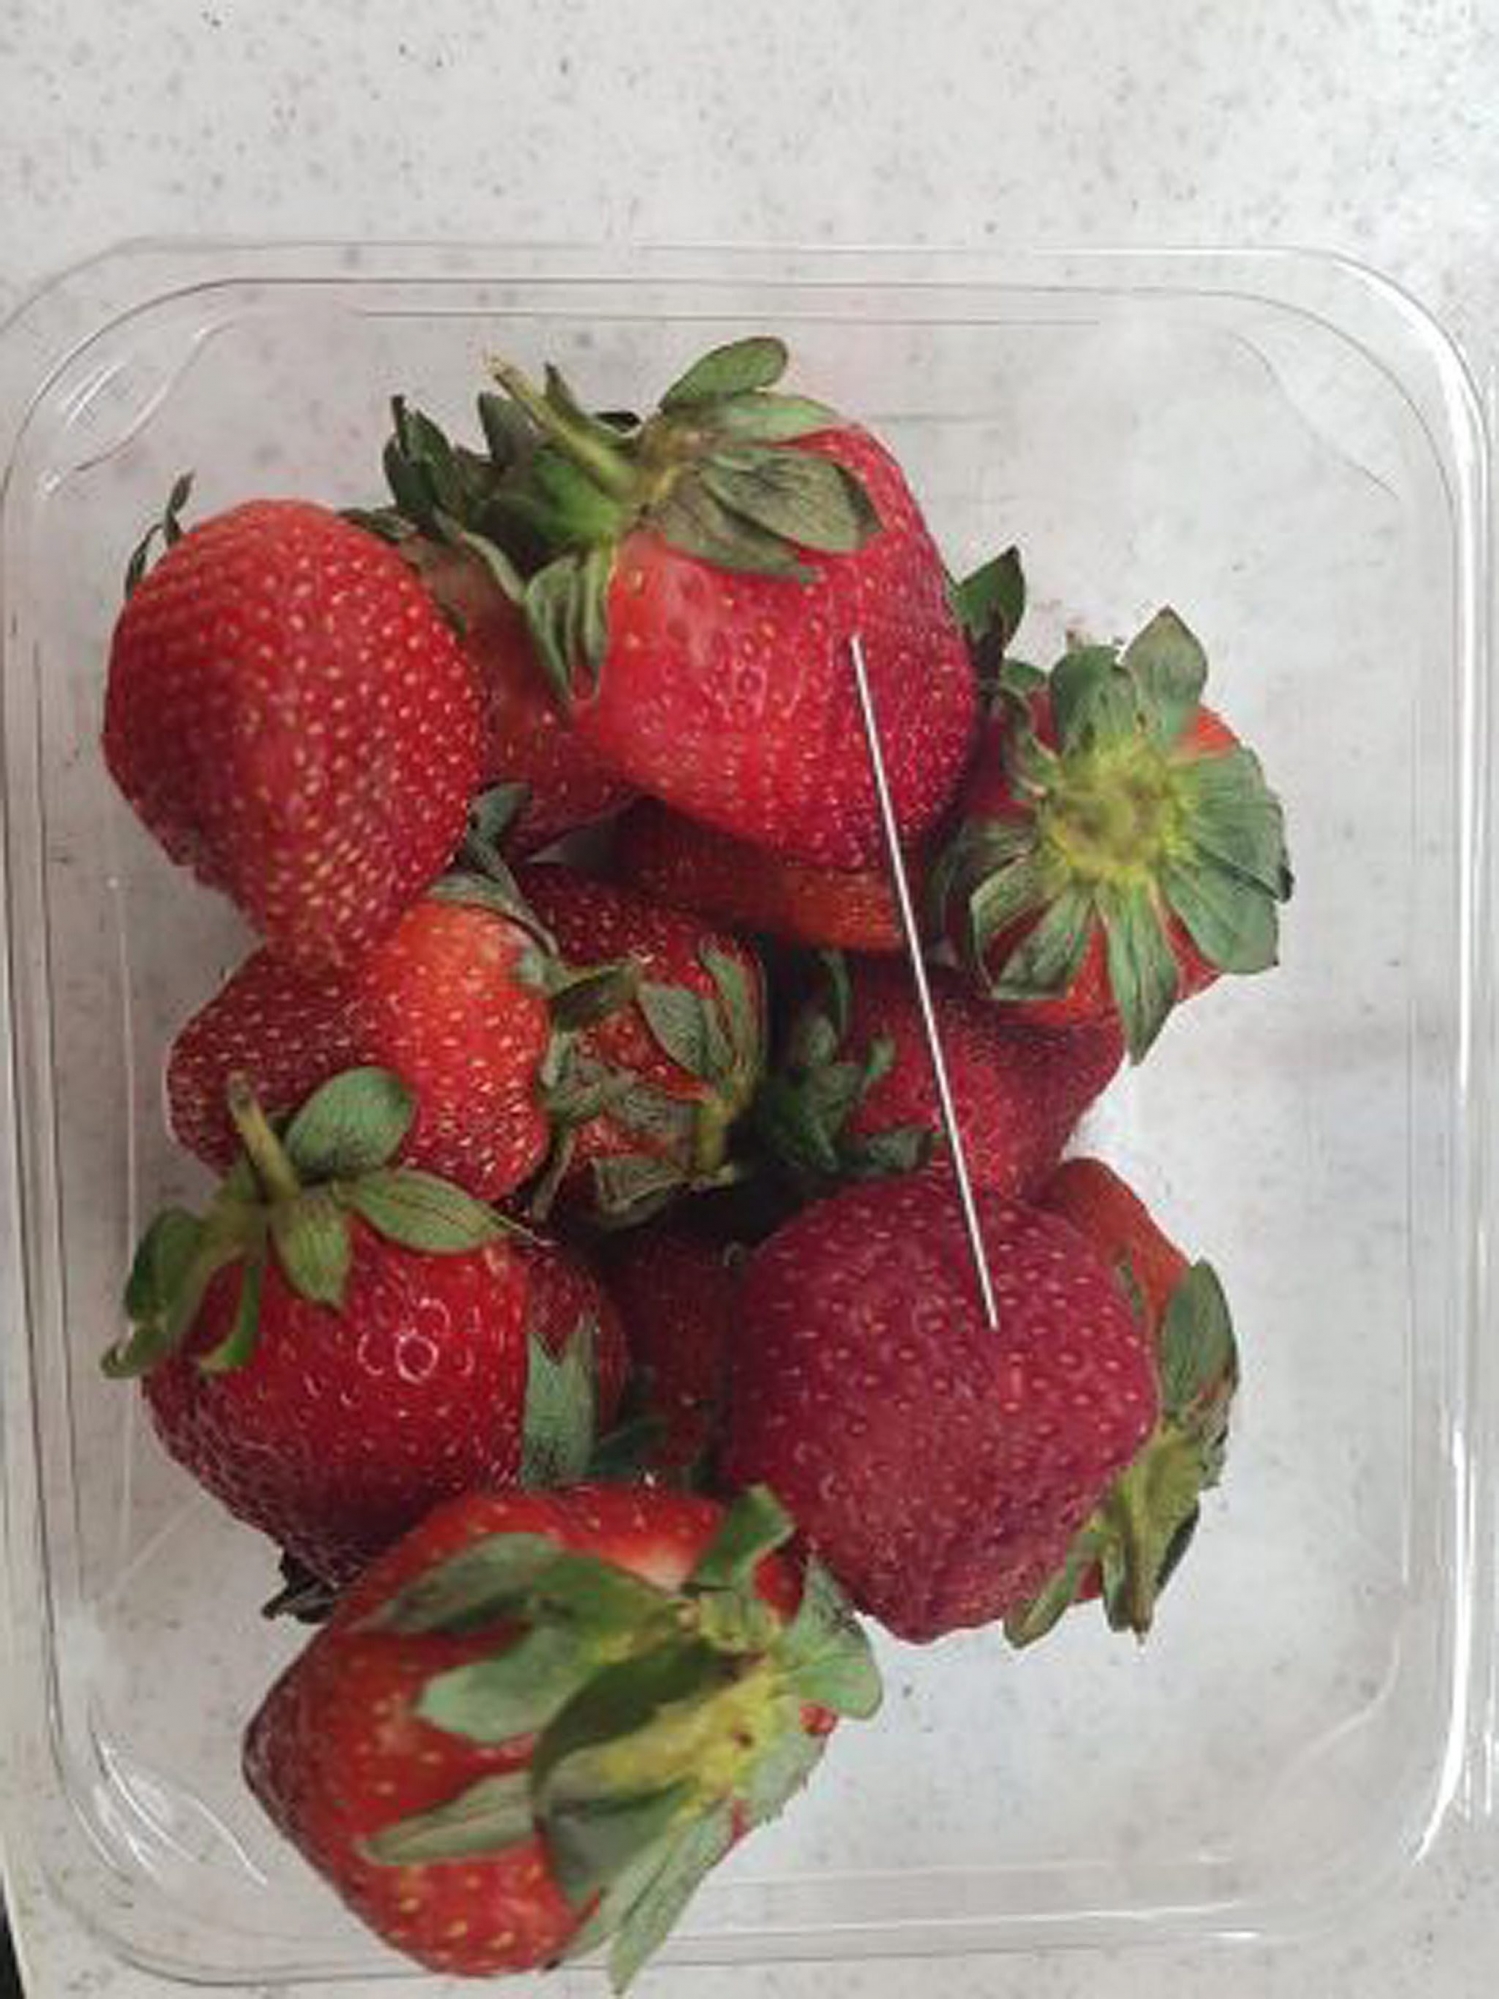 epa07019680 An undated handout photo made available by the Queensland Police on 14 September 2018 shows a thin piece of metal seen among a basket of strawberries in Gladstone, Queensland, Australia. Australia's Queensland Police are investigating a suspected copycat incident as part of the investigation into the contamination of strawberries in Queensland. The suspected copycat incident, reported at a supermarket in Gatton, involves the discovery of a thin metal object in a basket of strawberries.  EPA/QUEENSLAND POLICE HANDOUT -- BEST QUALITY AVAILABLE -- AUSTRALIA AND NEW ZEALAND OUT HANDOUT EDITORIAL USE ONLY/NO SALES AUSTRALIA QUEENSLAND STRAWBERRY CONTAMINATION